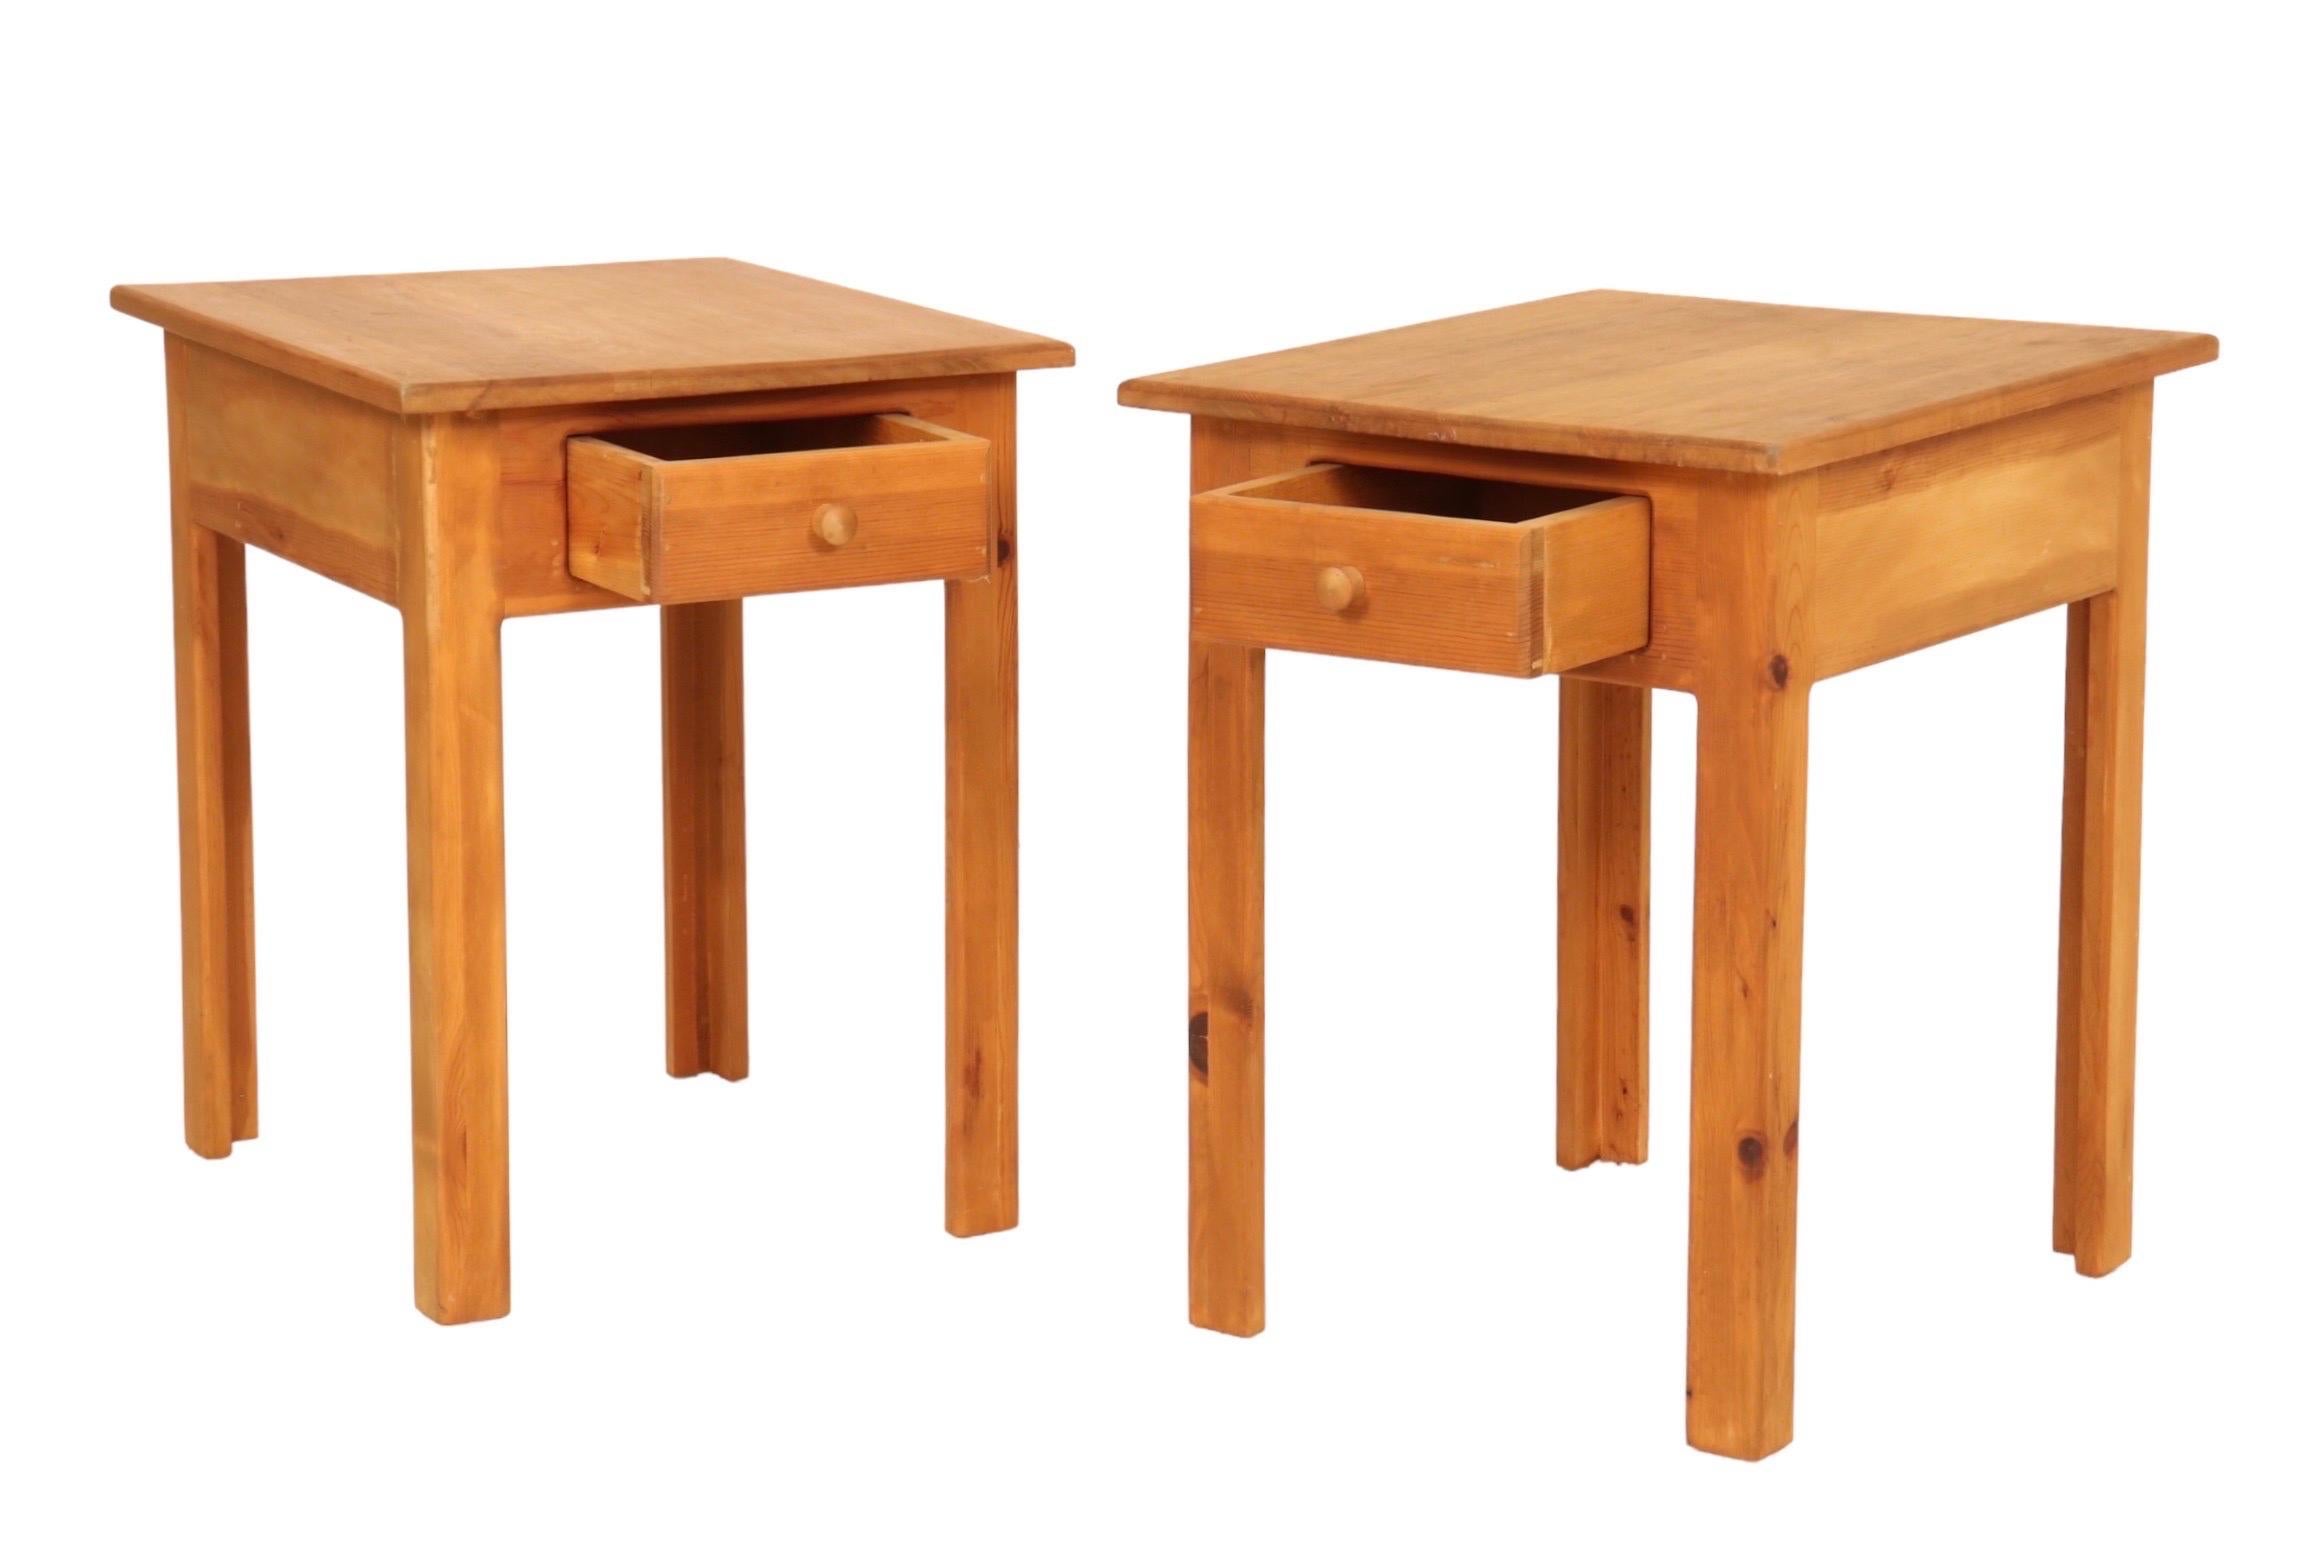 A pair of craftsman style side tables made of knotty pine. Each has a single drawer that opens with a mushroom shaped knob handle and stands on straight L-shaped legs. Dimensions per side table.